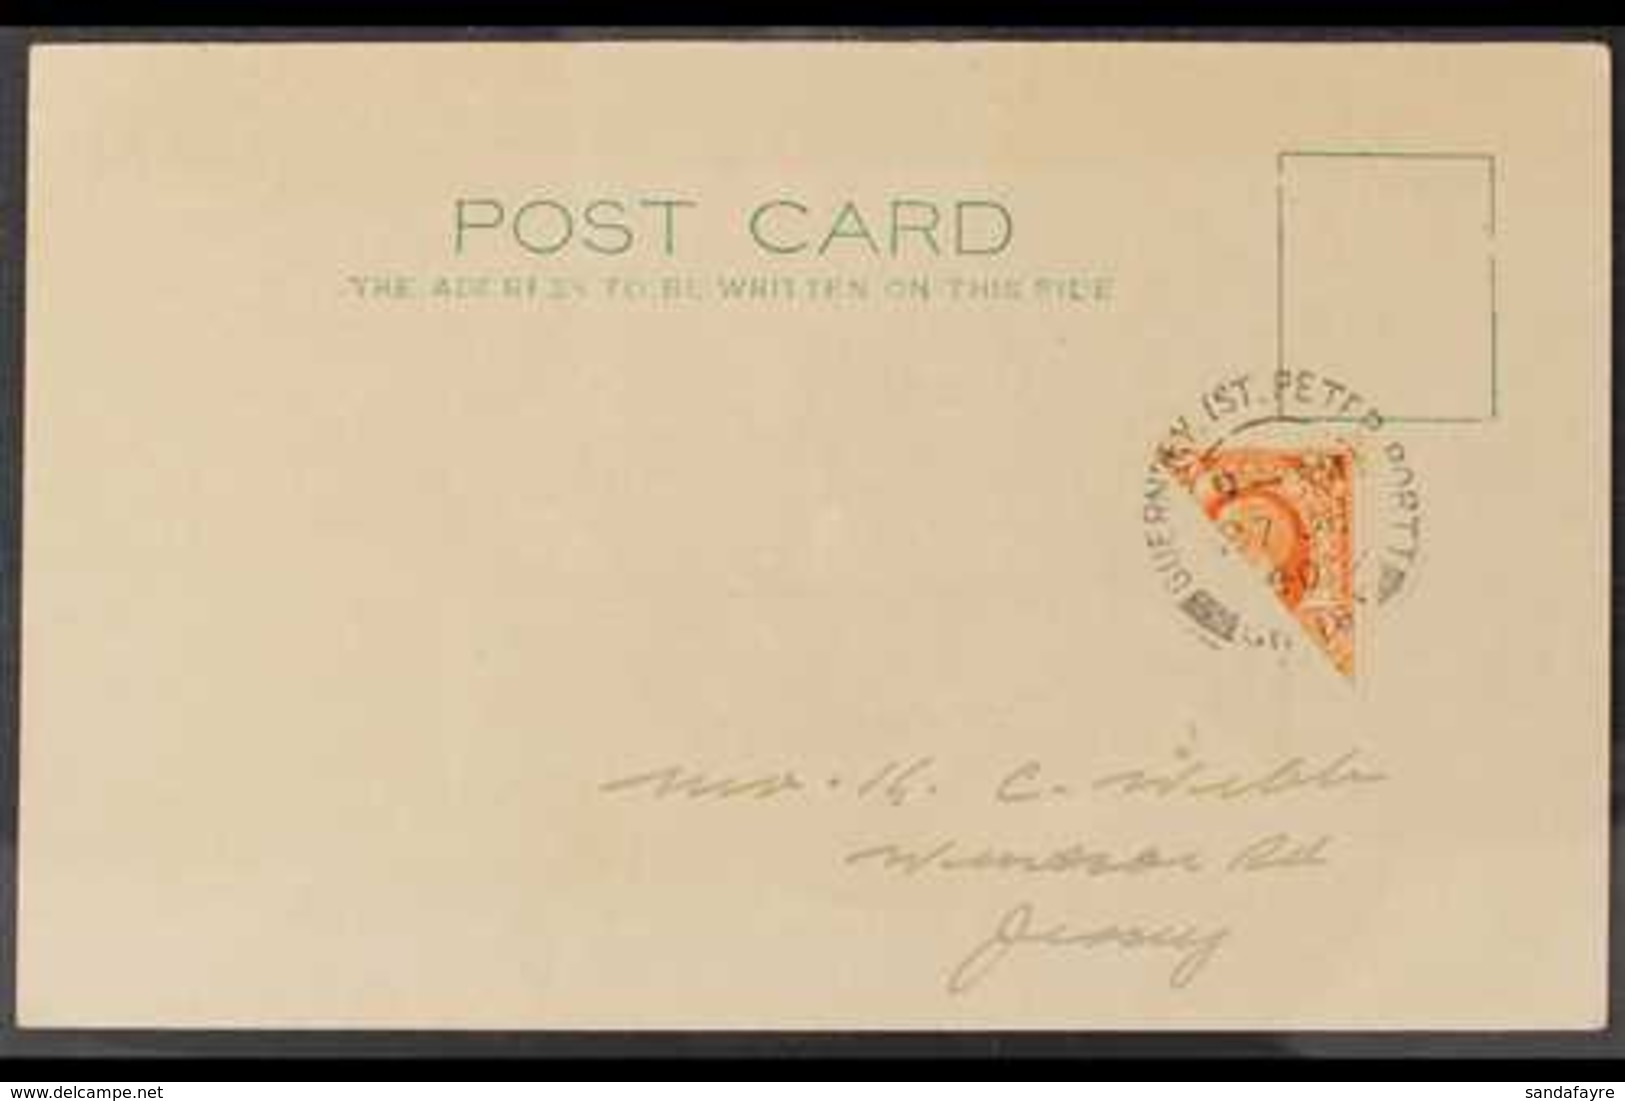 1940 (27 Dec) Post Card To Jersey From Guernsey Bearing GB 1935 2d Orange KGV Photogravure Stamp BISECTED Diagonally And - Non Classificati